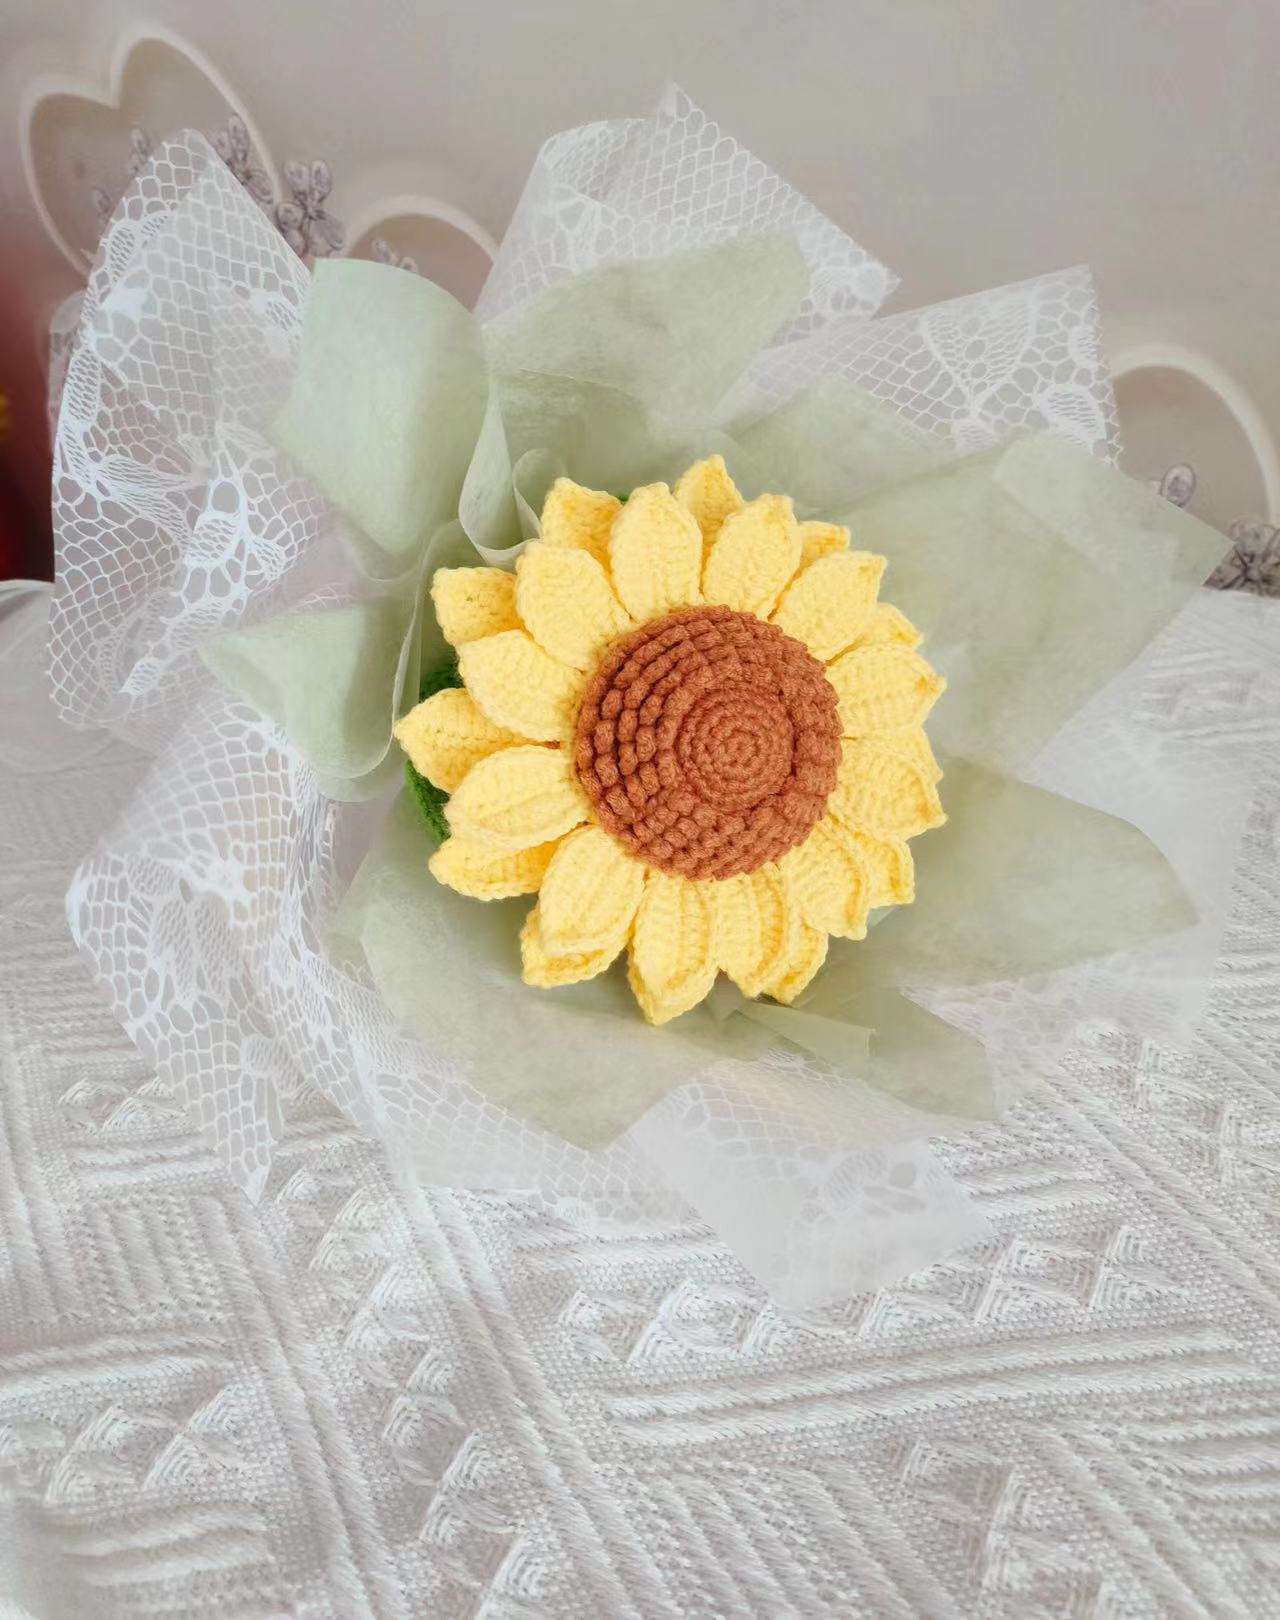 Handmade Floral Arrangement with Sunflowers and Other Flowers